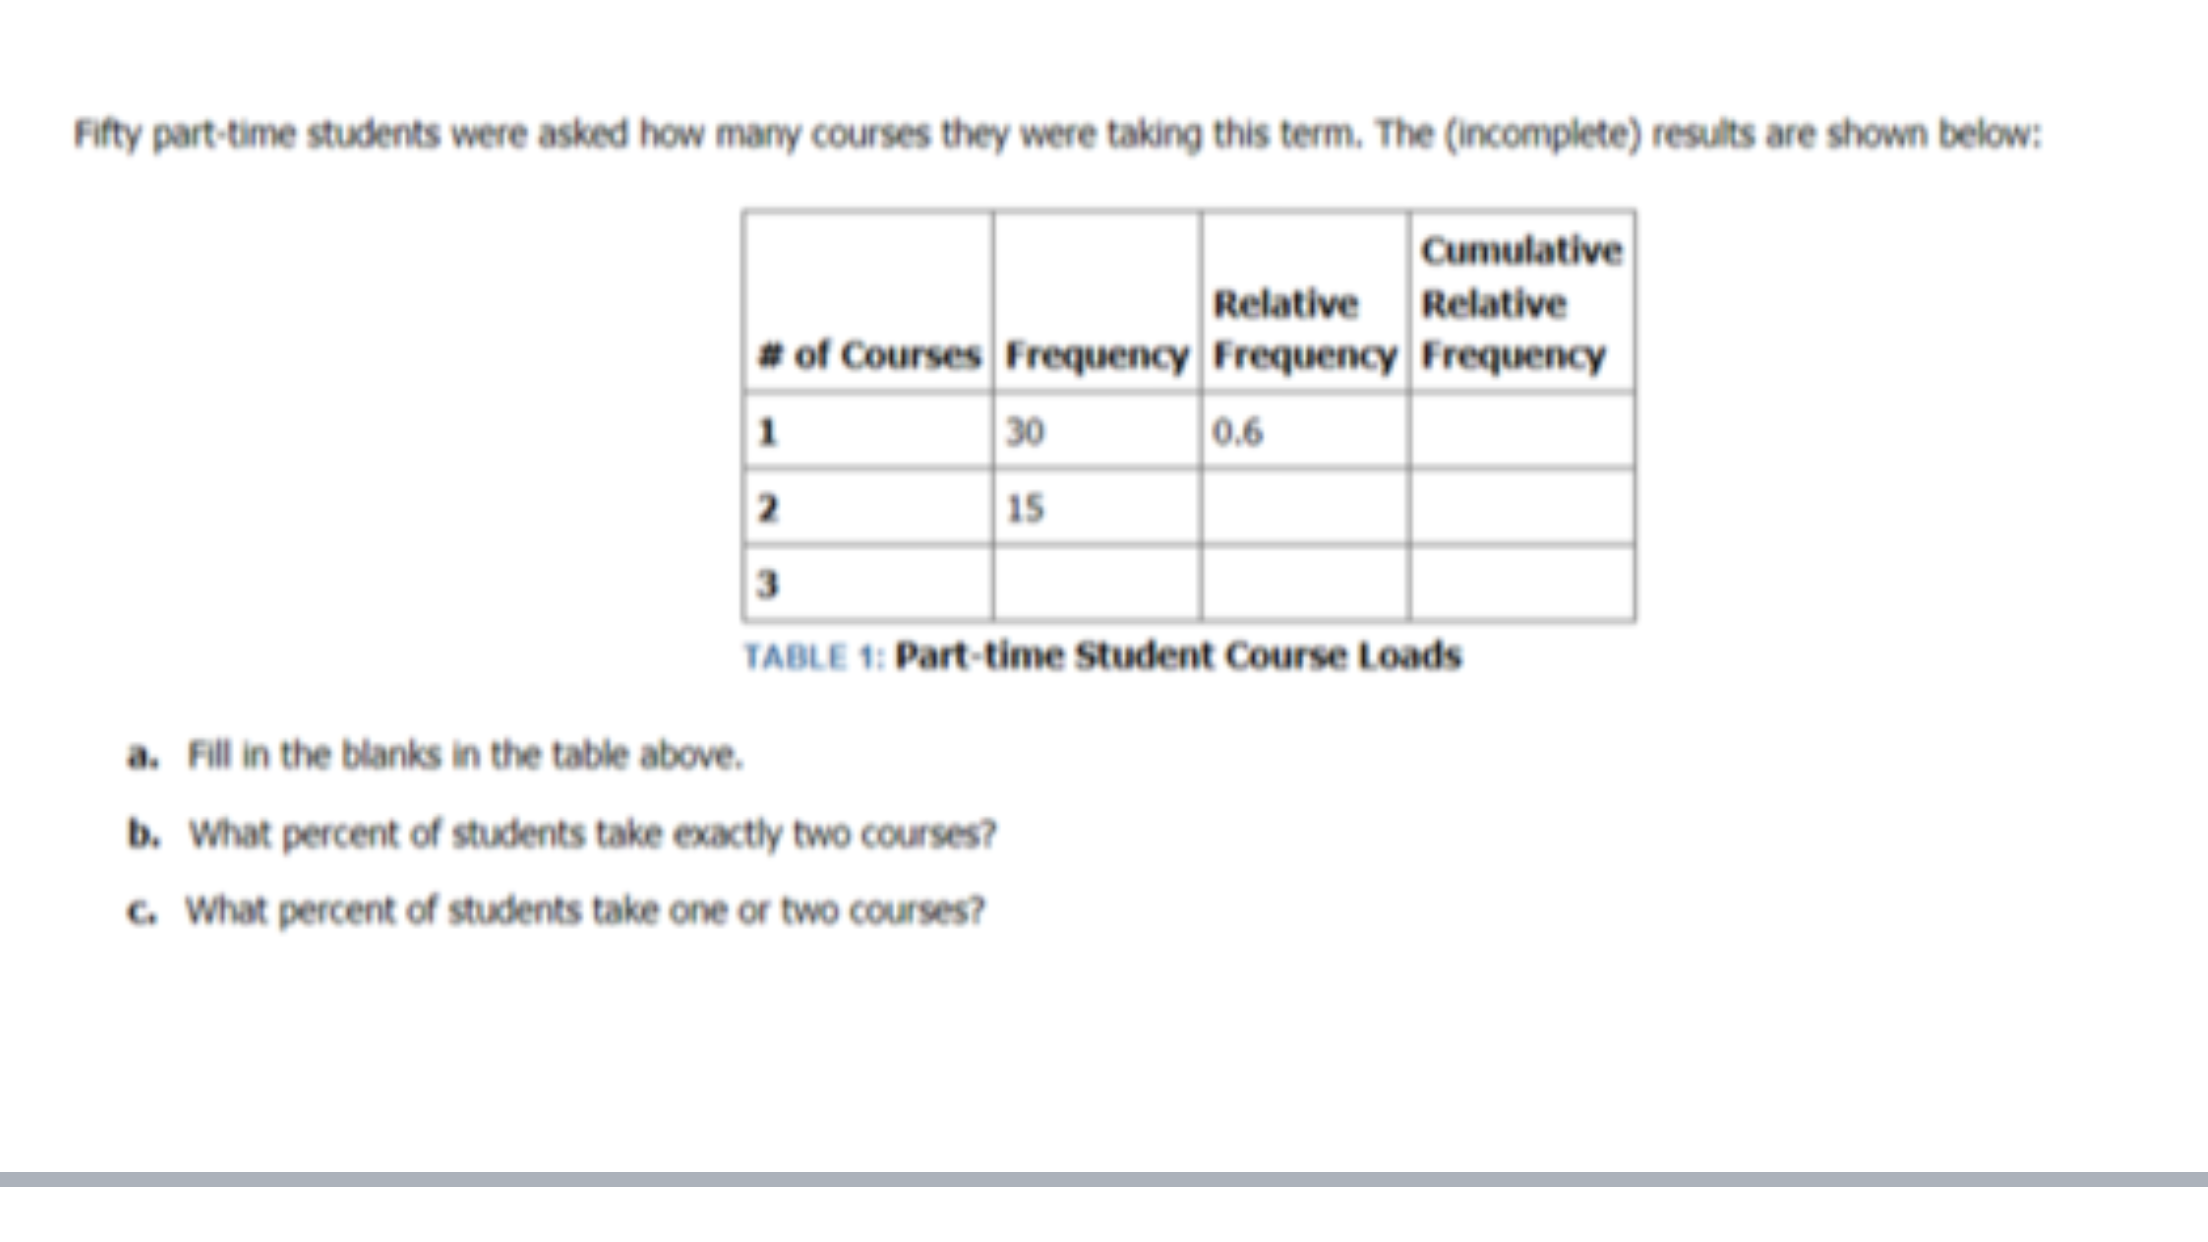 Fifty part-time students were asked how many courses they were taking this term. The (Incomplete) results are shown below:
Cumulative
Relative Relative
# of Courses Frequency Frequency Frequency
1
30
0.6
2
15
3
TABLE 1: Part-time Student Course Loads
a. Fill in the blanks in the table above.
b. What percent of students take exactly two courses?
c. What percent of students take one or two courses?
